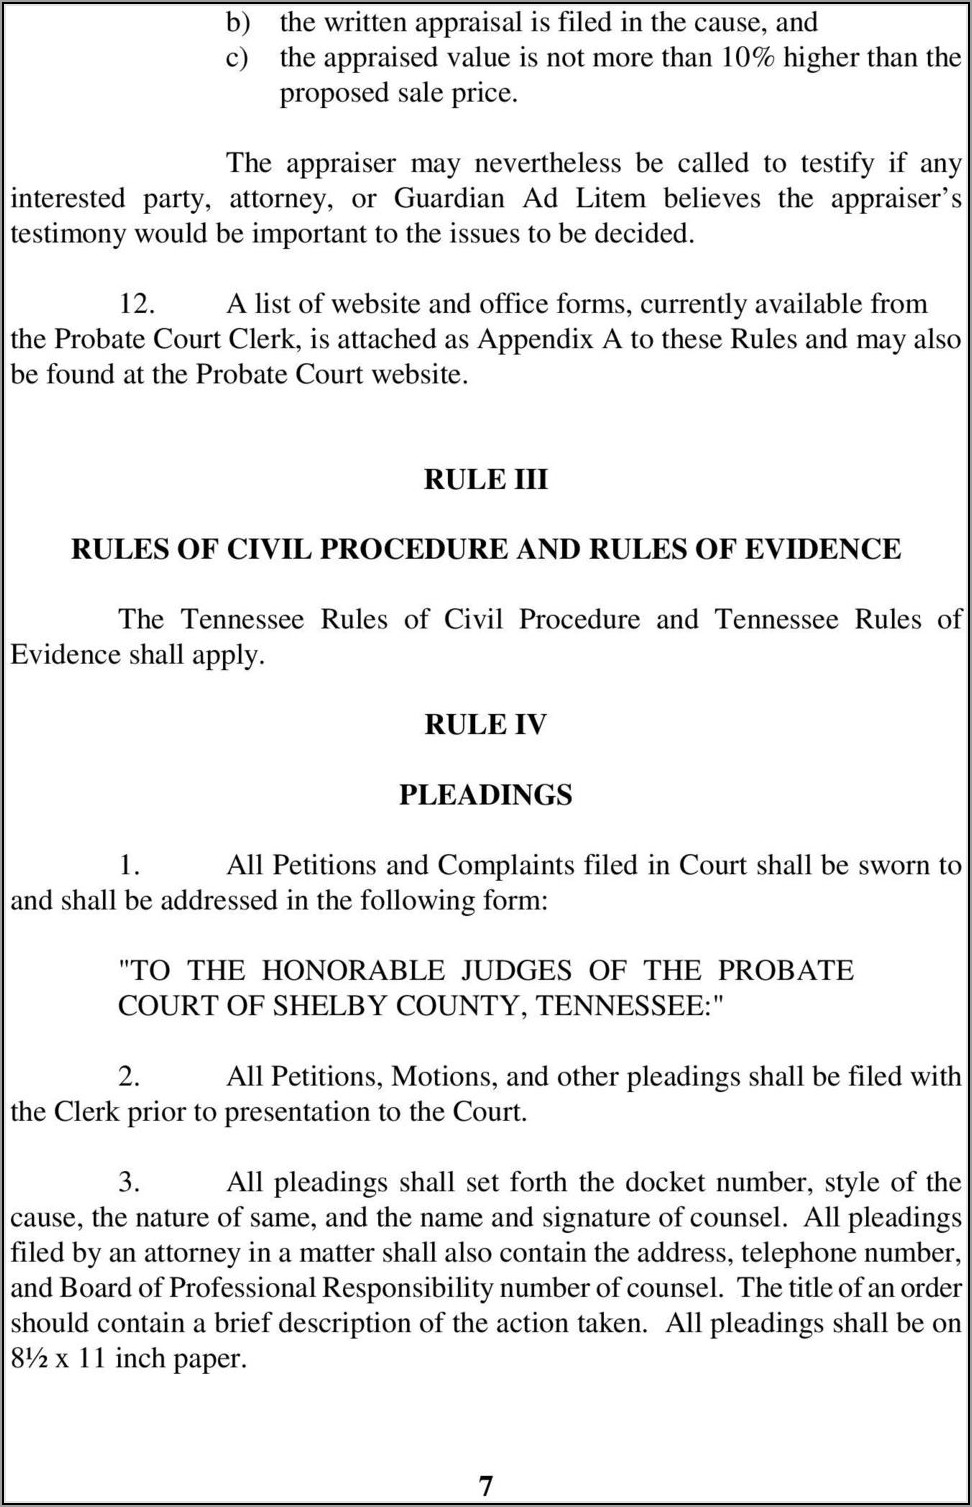 Shelby County Circuit Court Forms